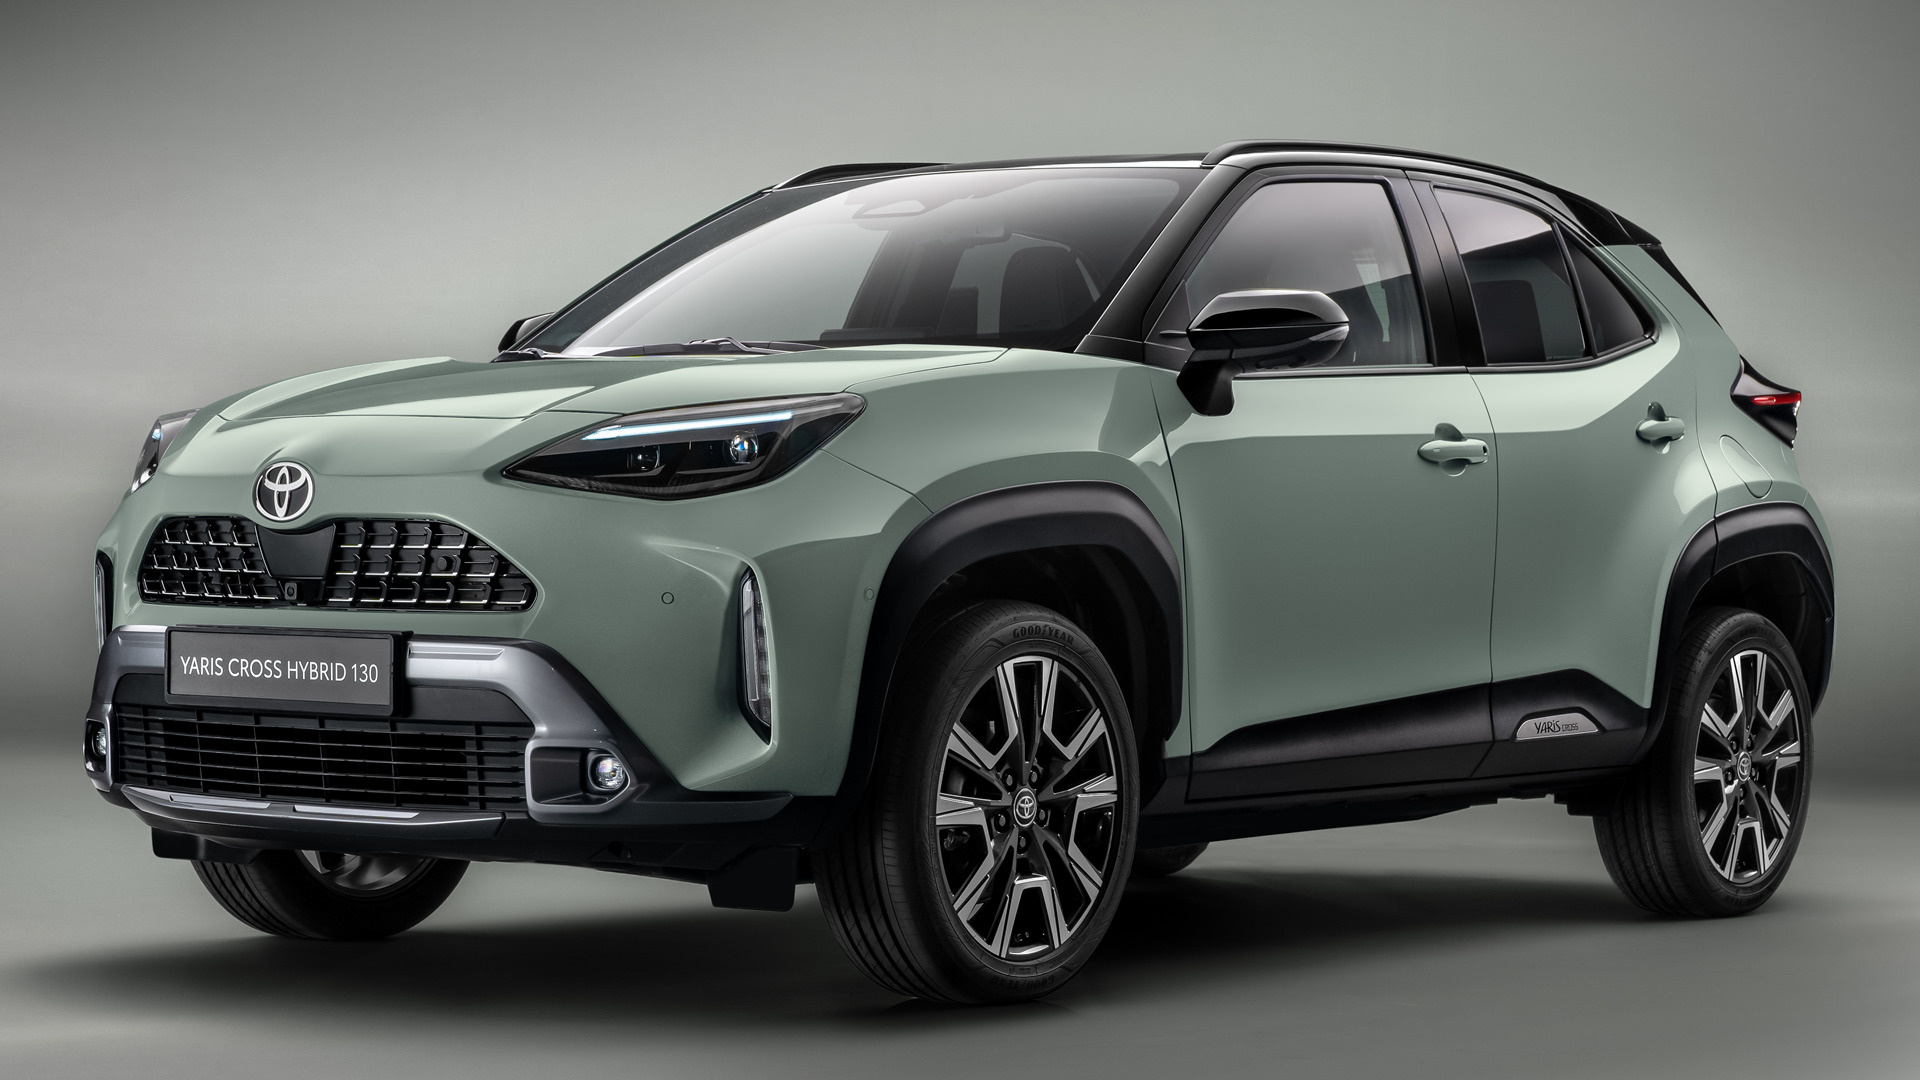 2023 Toyota Yaris Cross Hybrid Premiere Edition Wallpapers And Hd